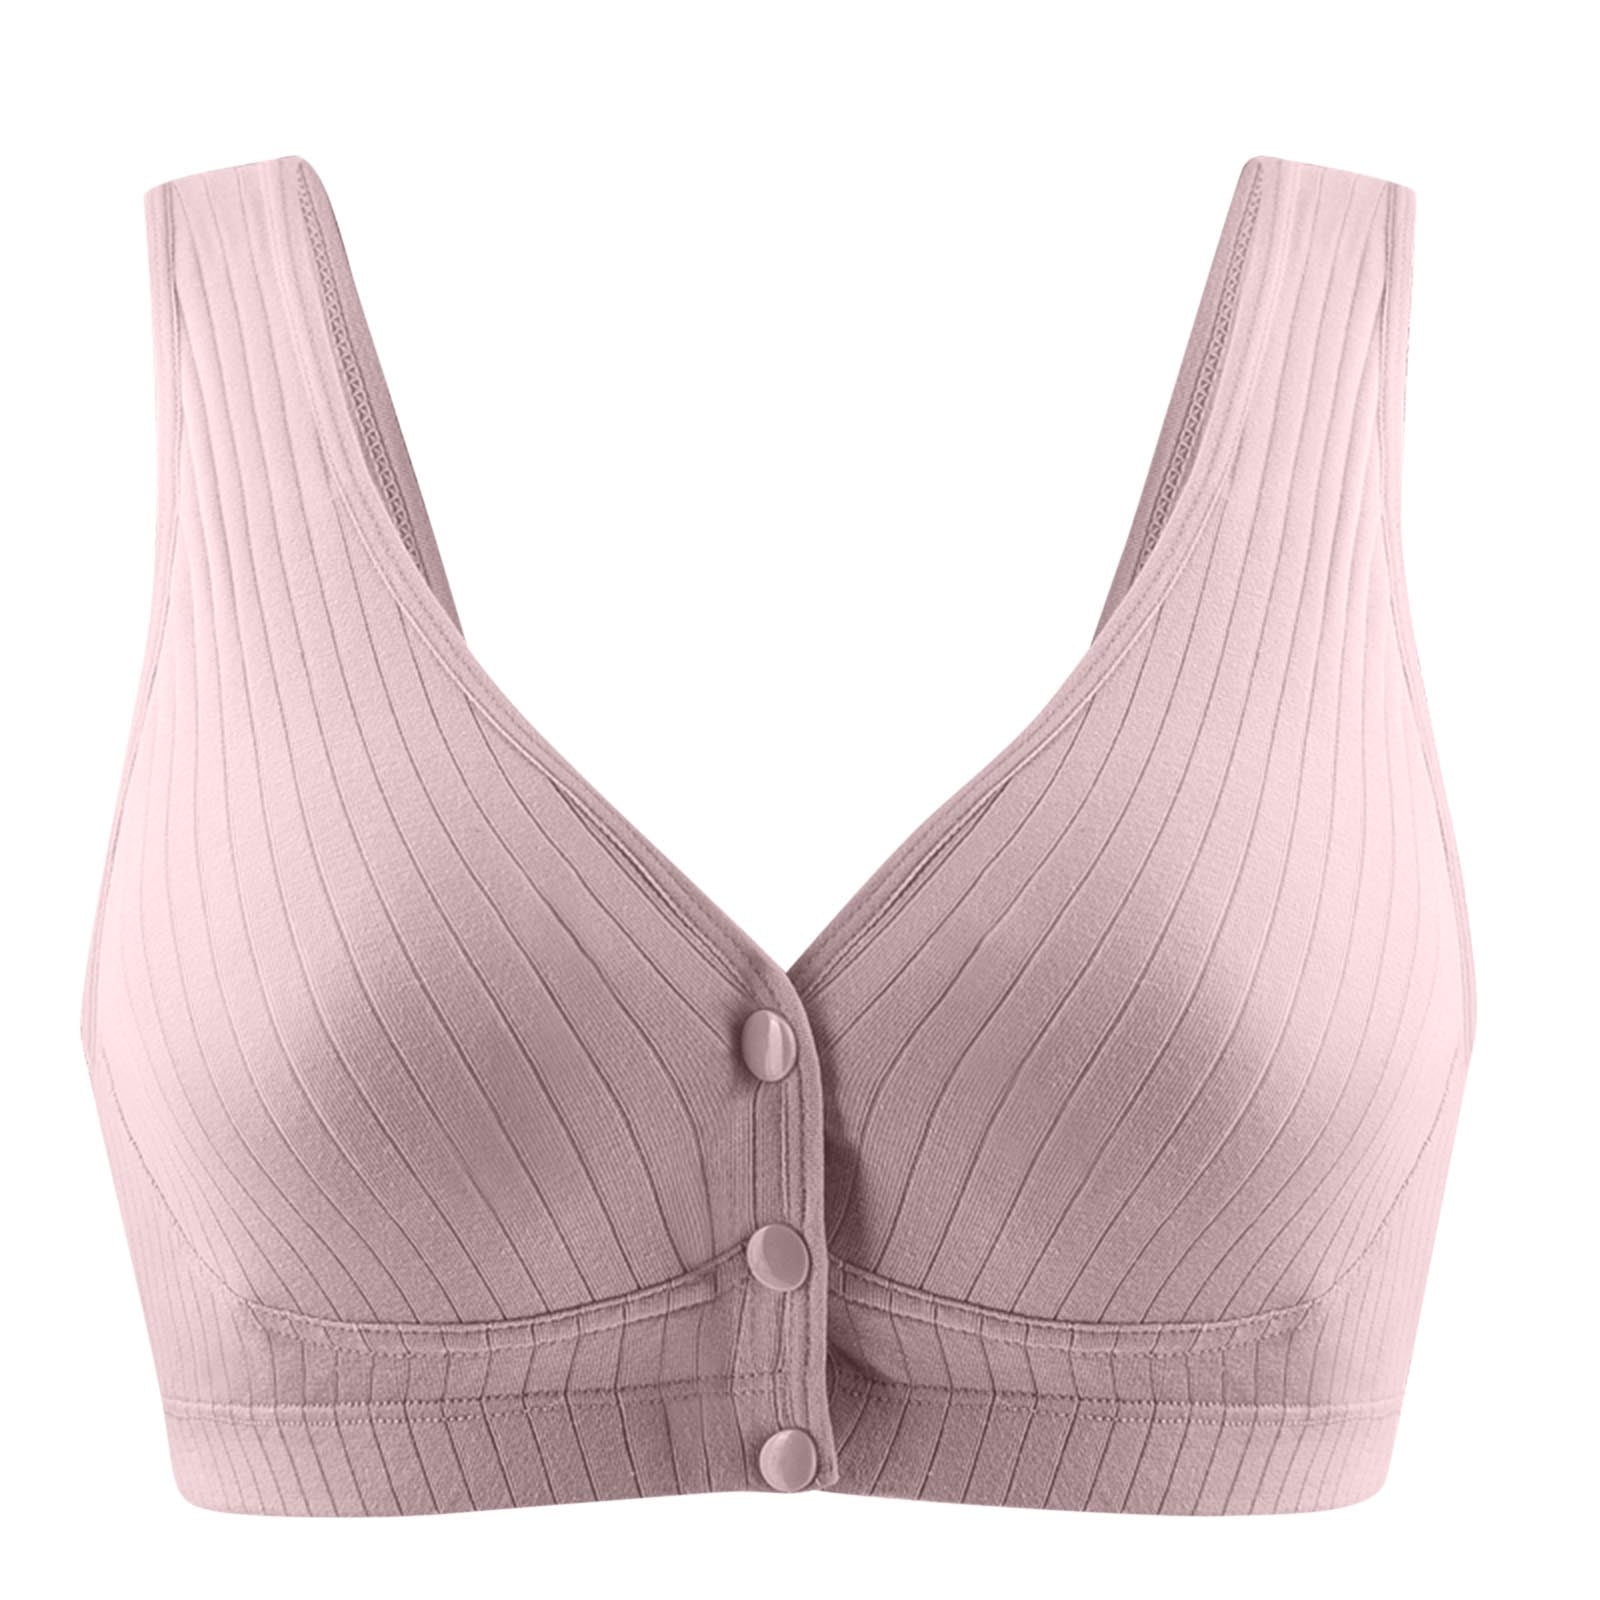 Levmjia Sports Bras For Women Plus Size Clearance Women's Solid Color  Seamless Breathable Super Elastic Feeding Pajamas Sexy Bra